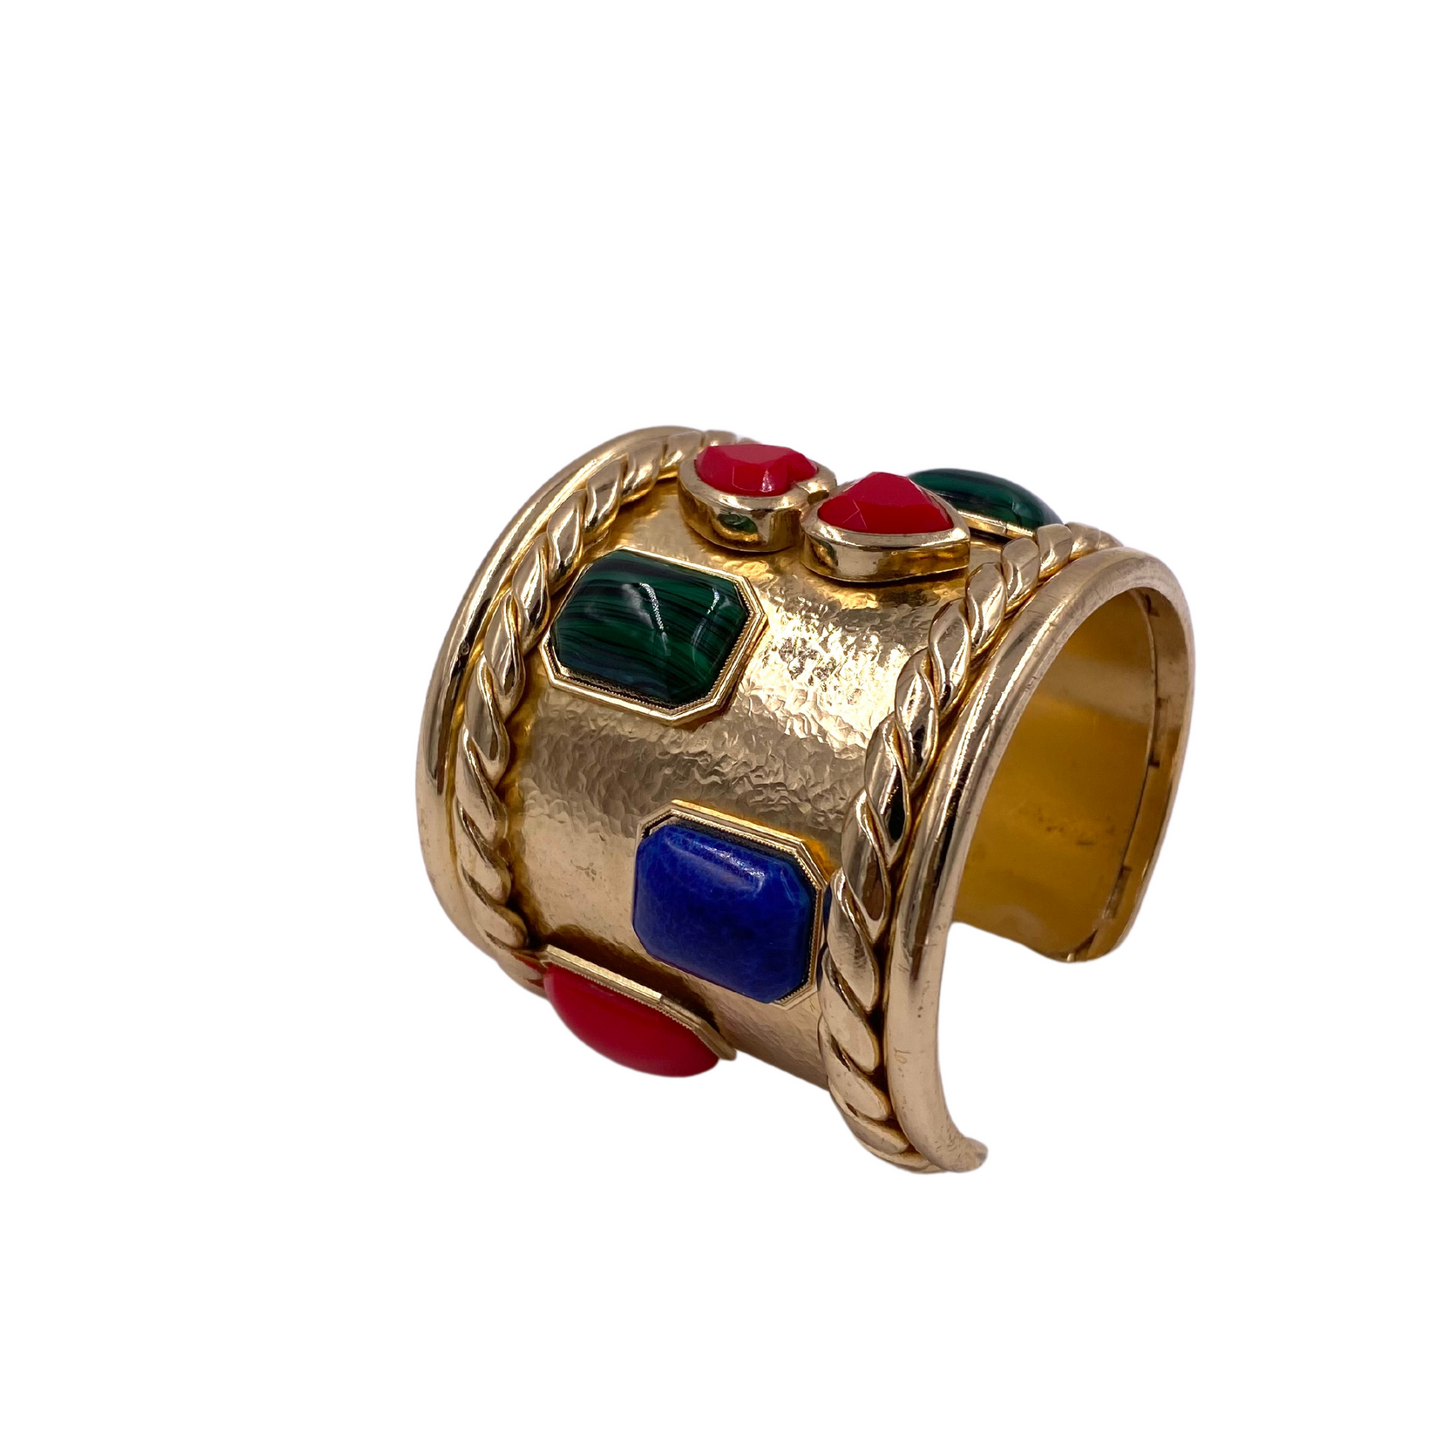 Christian Lacroix Gold Cuff with Green/red/blue Glass Stones